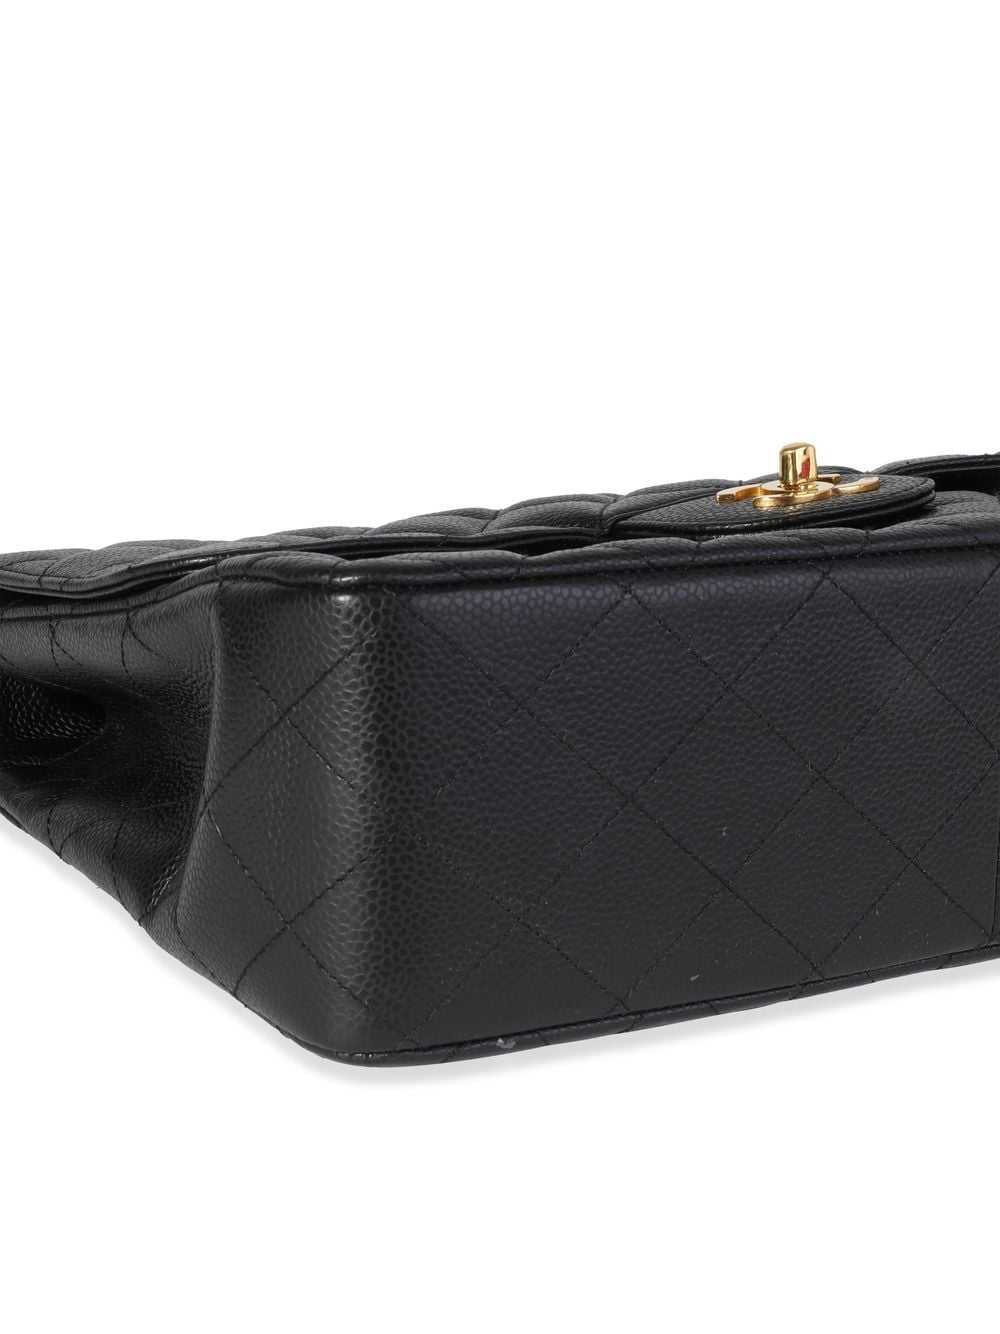 CHANEL Pre-Owned Jumbo Classic Flap shoulder bag … - image 5